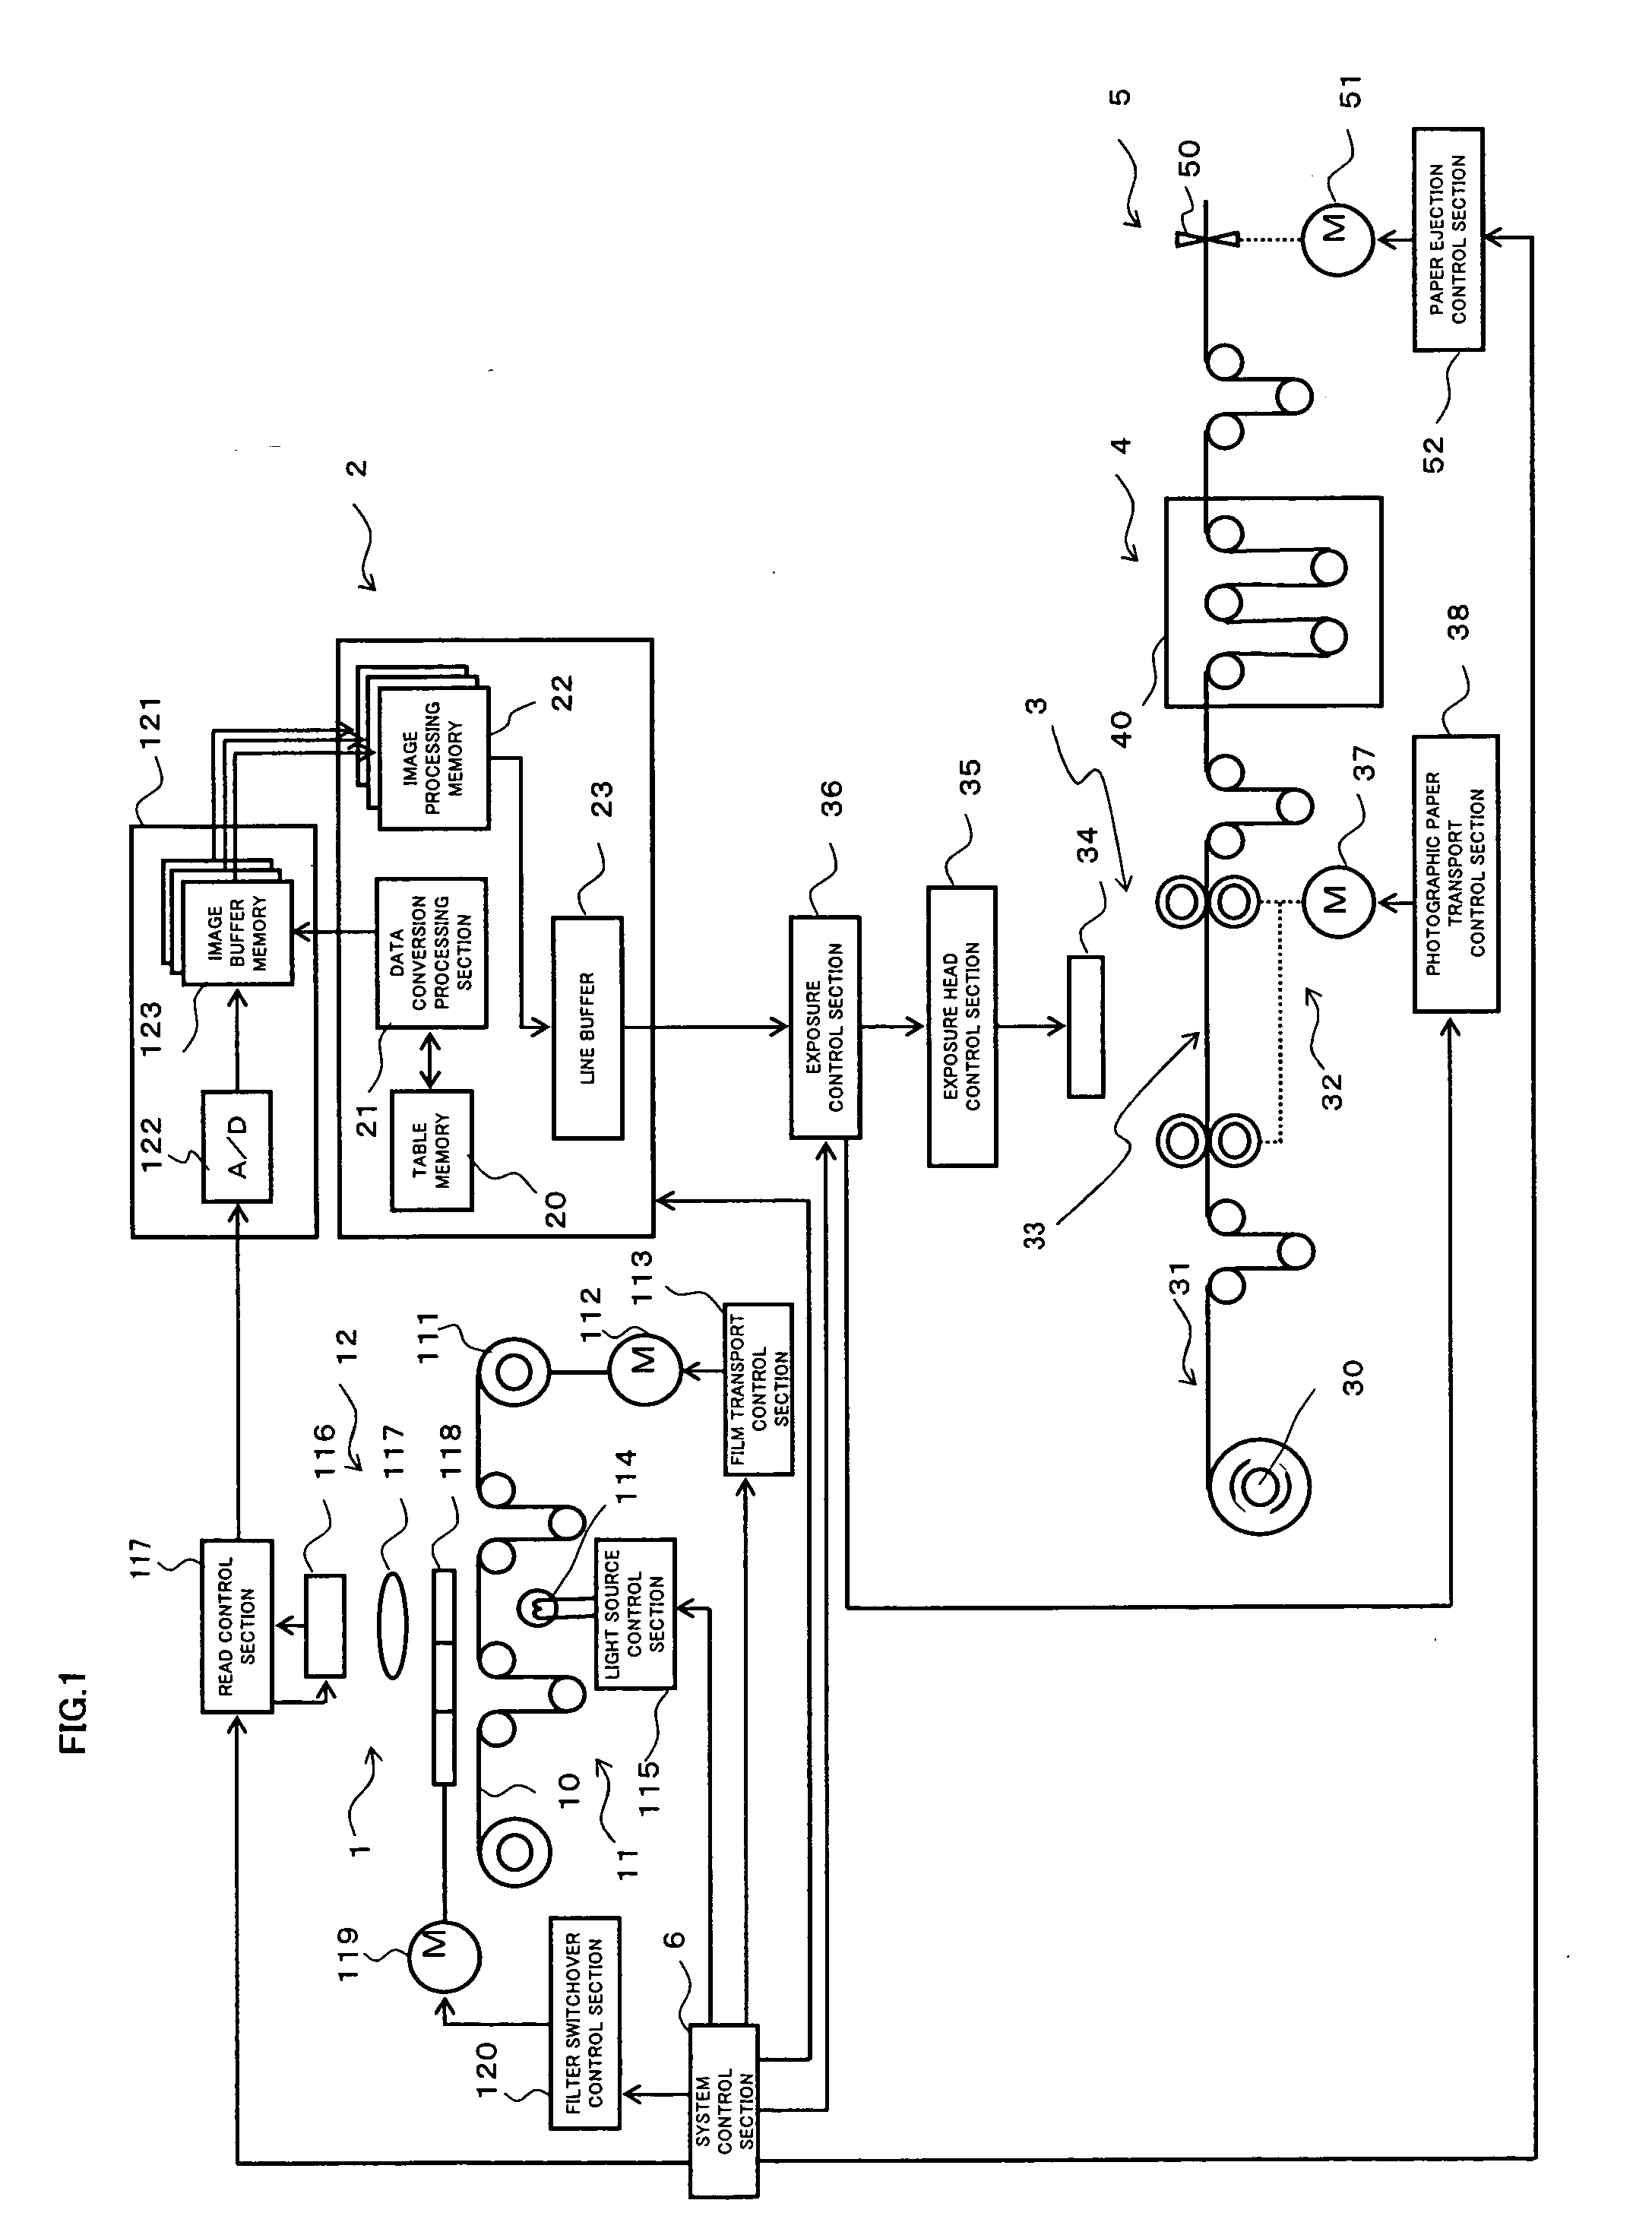 Method for determining whether photographic image is different-color-structure photographic image and photographic image processing apparatus